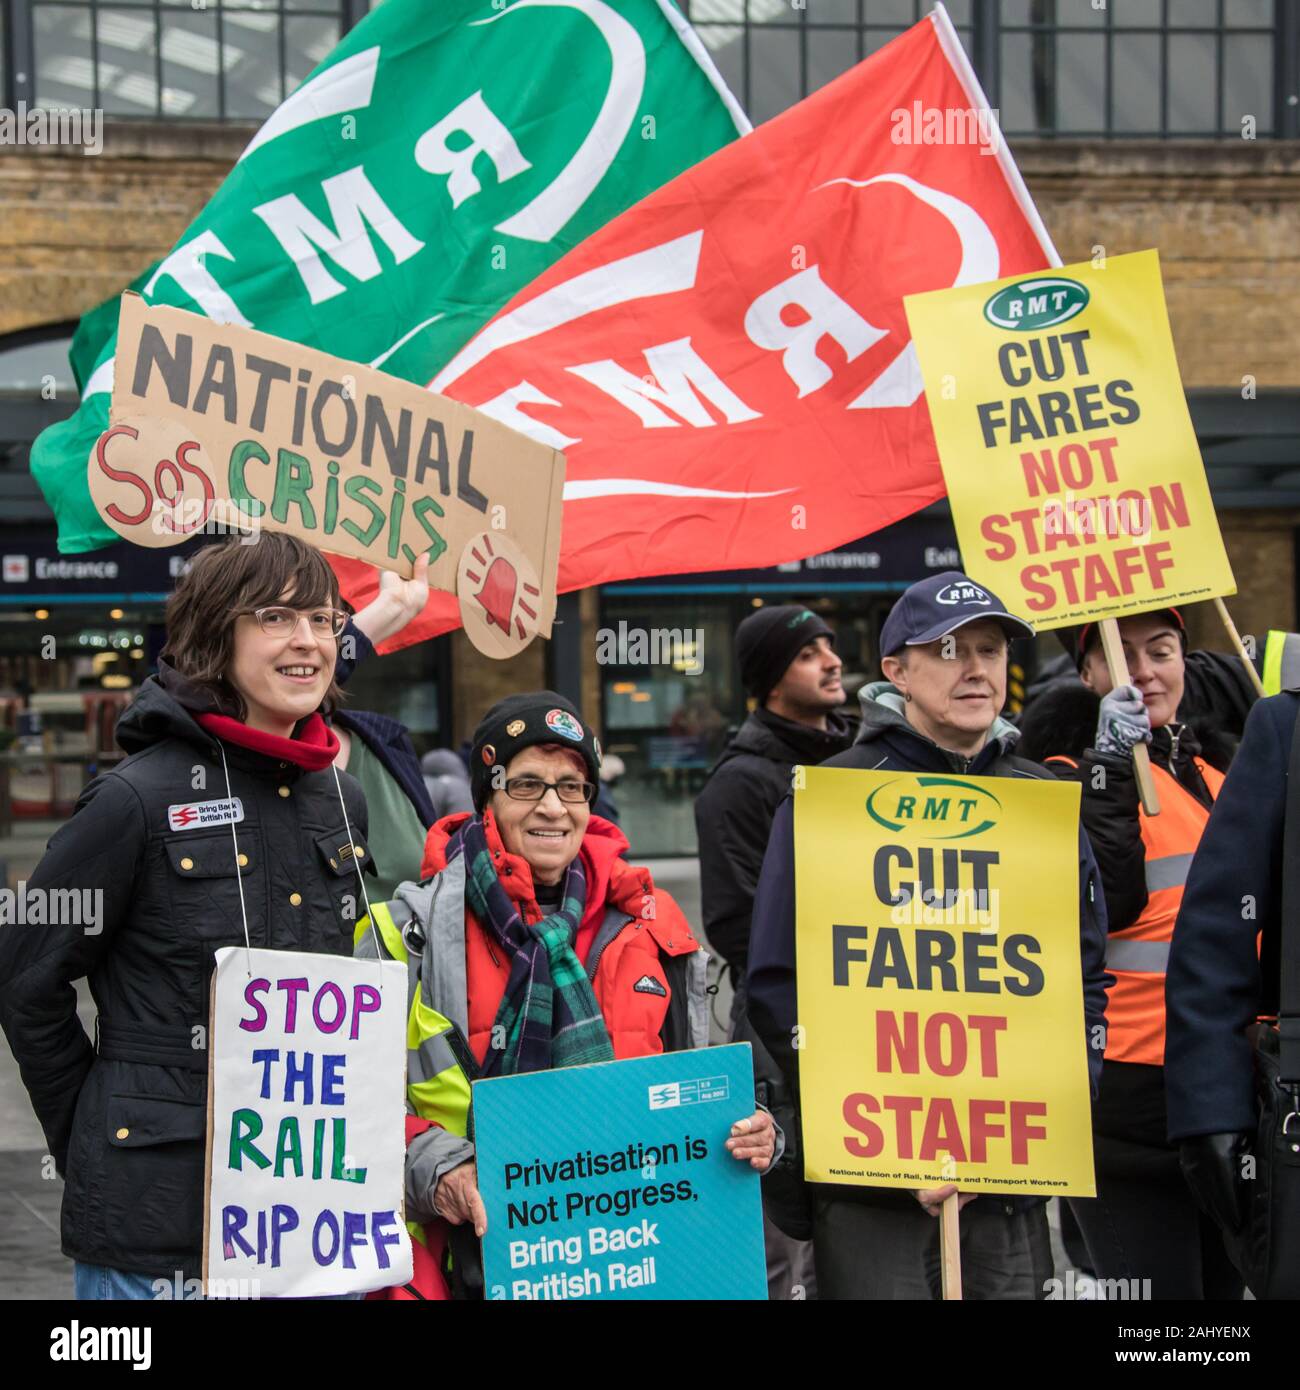 London, UK. 2 January,2020. The Association of British Commuters and members of the RMT Union held a protest at Kings Cross Station in London to highlight continued staff cuts, riseing fares and a general decline in rail services. David Rowe/Alamy Live News. Stock Photo